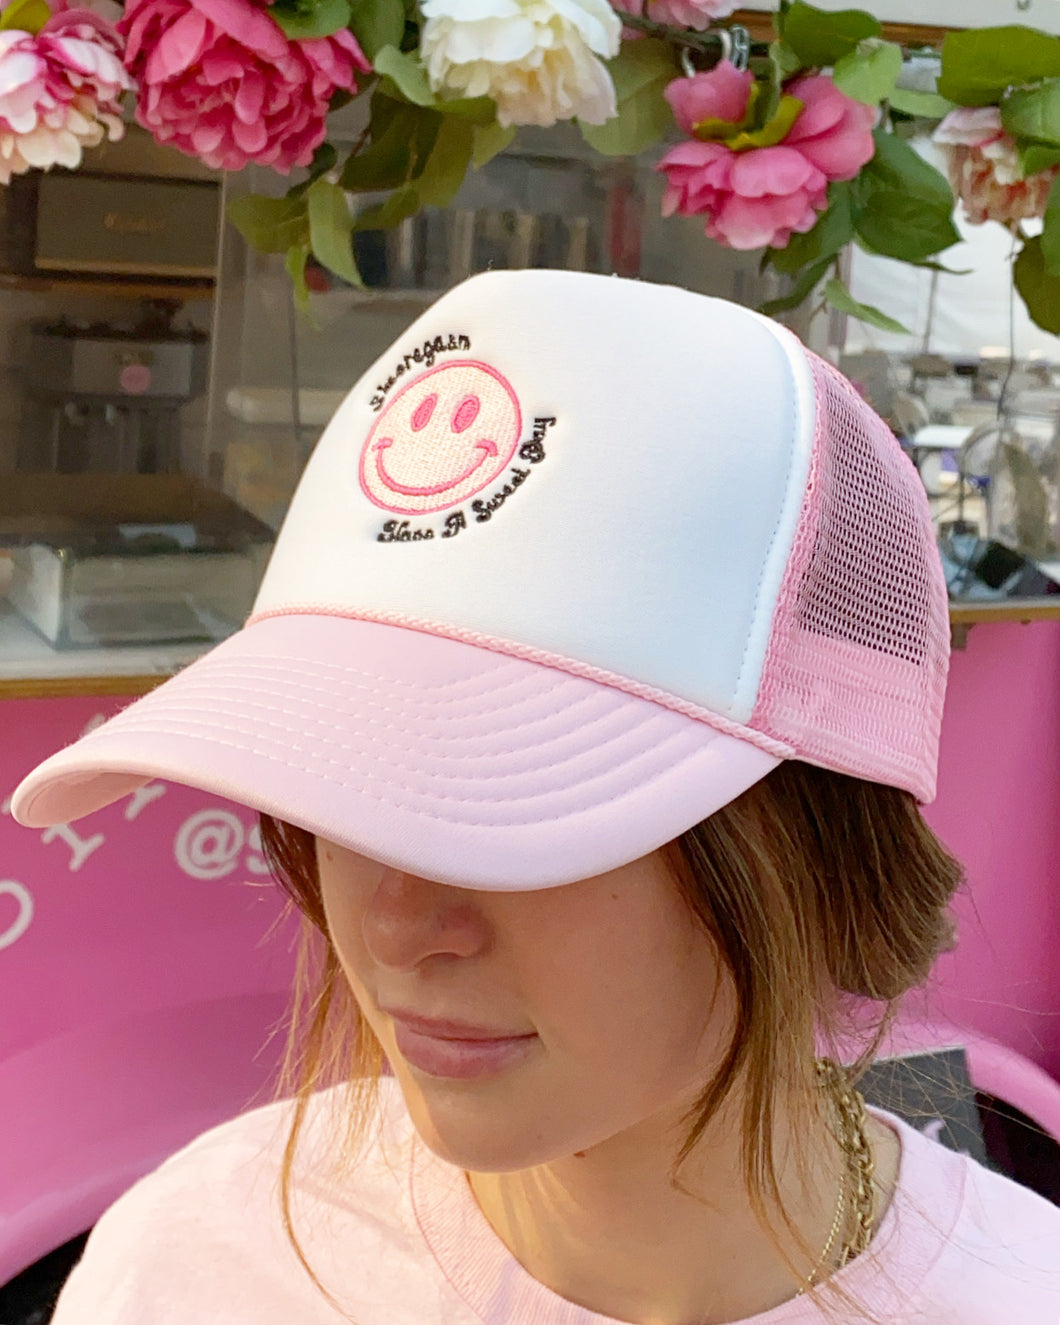 “HAVE A SWEET DAY” Trucker Hat